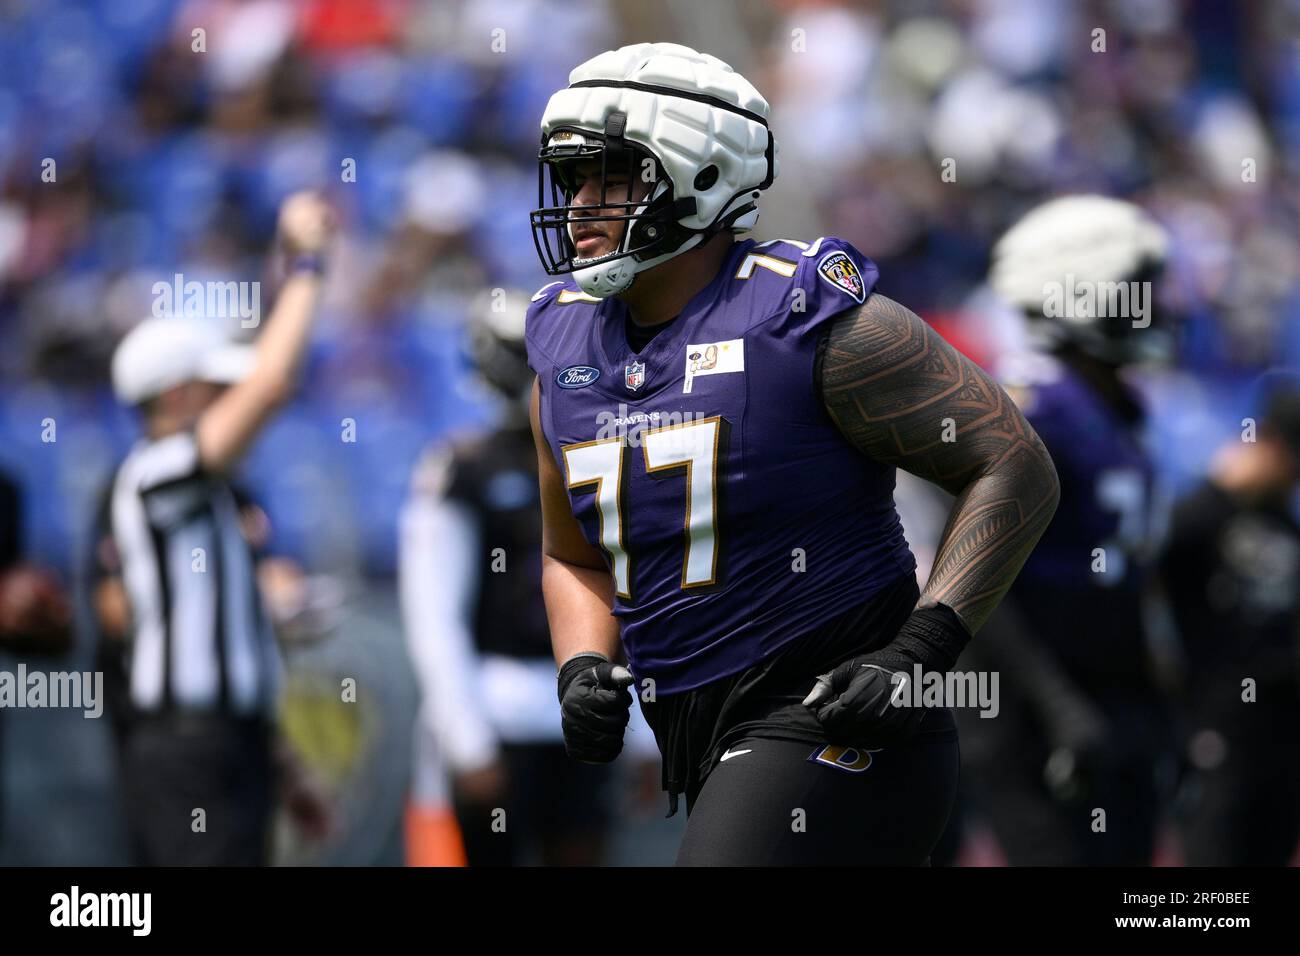 Baltimore Ravens offensive tackle Daniel Faalele plays against the